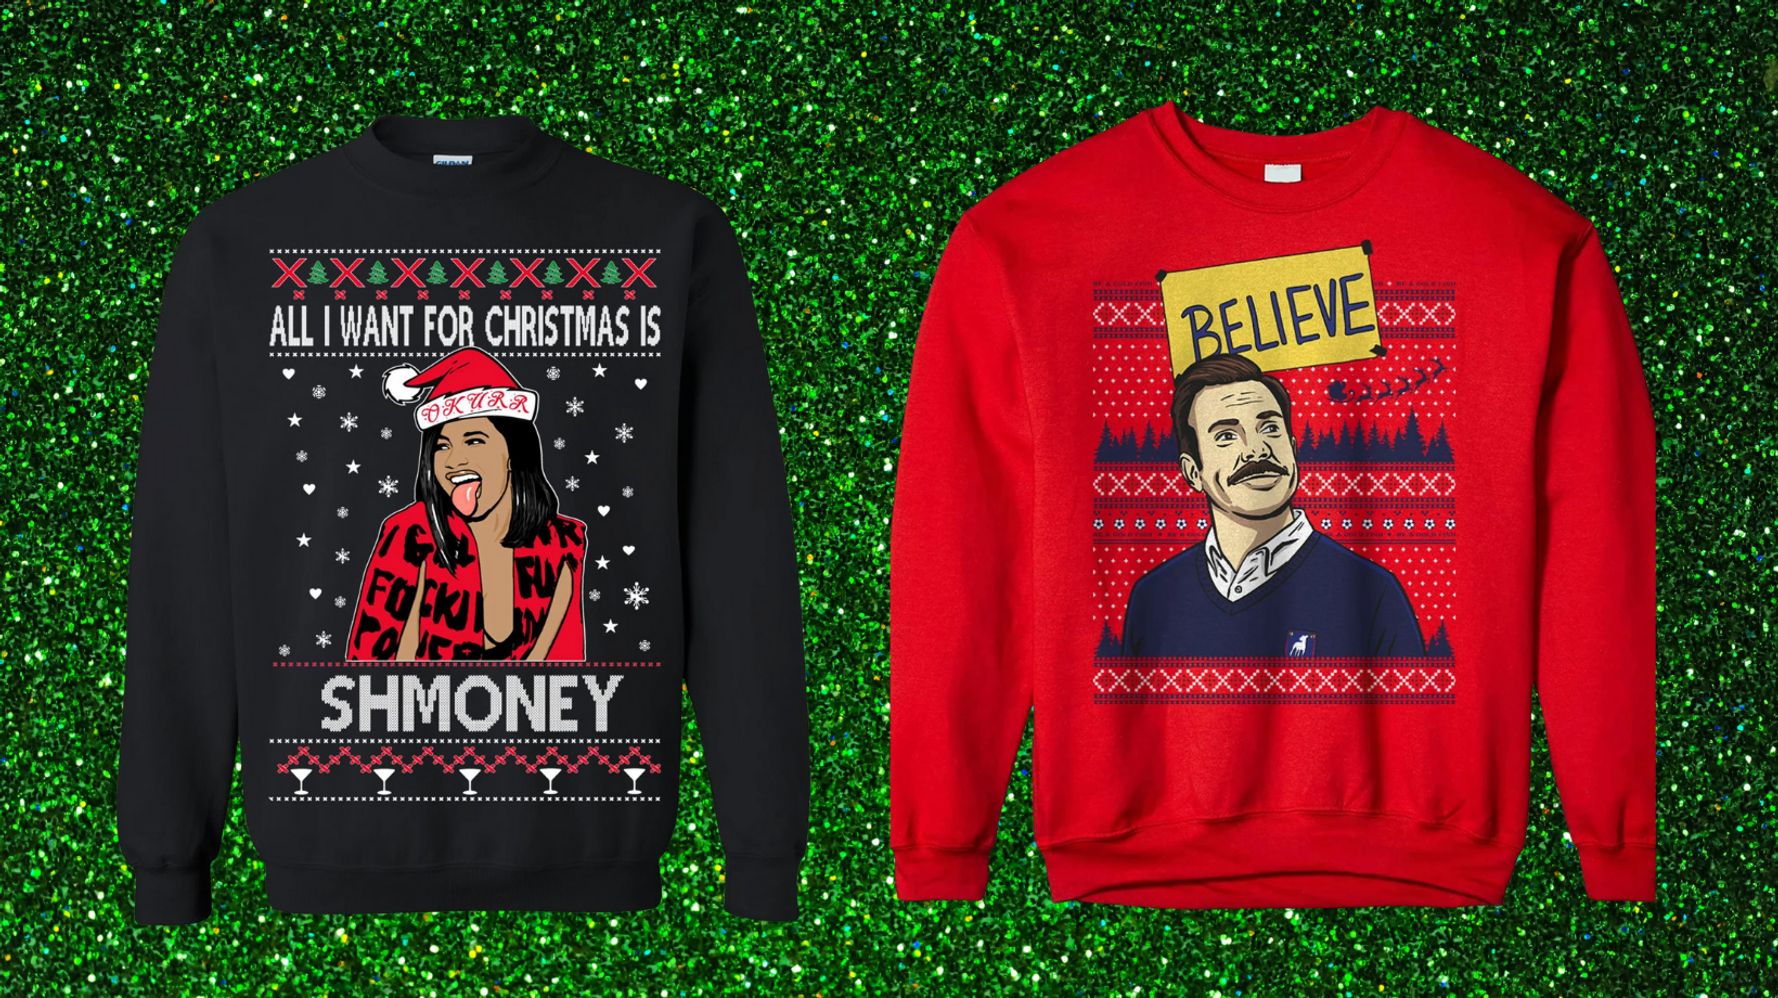 15 of the Best Ugly Christmas Sweaters for Holiday Parties